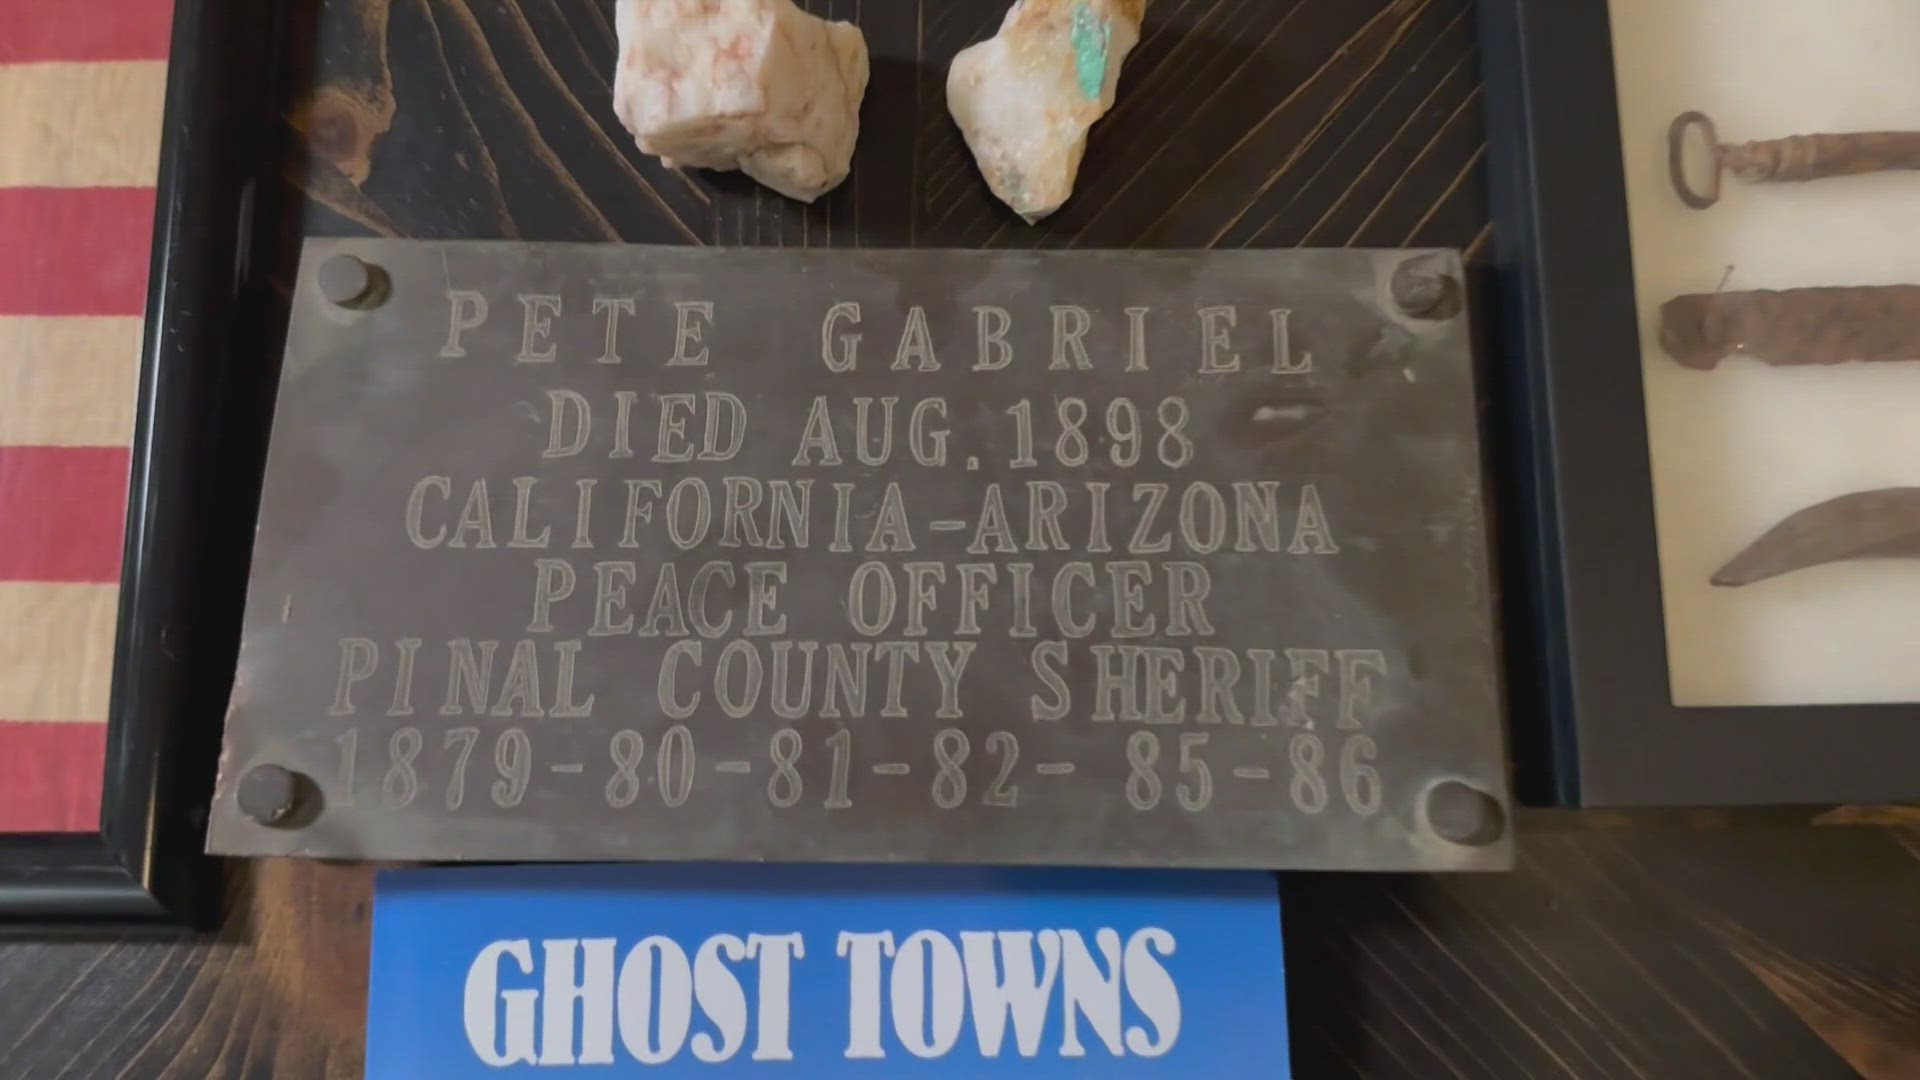 The grave marker of former Pinal County Sheriff John Peter Gabriel had been sitting in Skylar Annesi's grandfather's attic for 50 years.